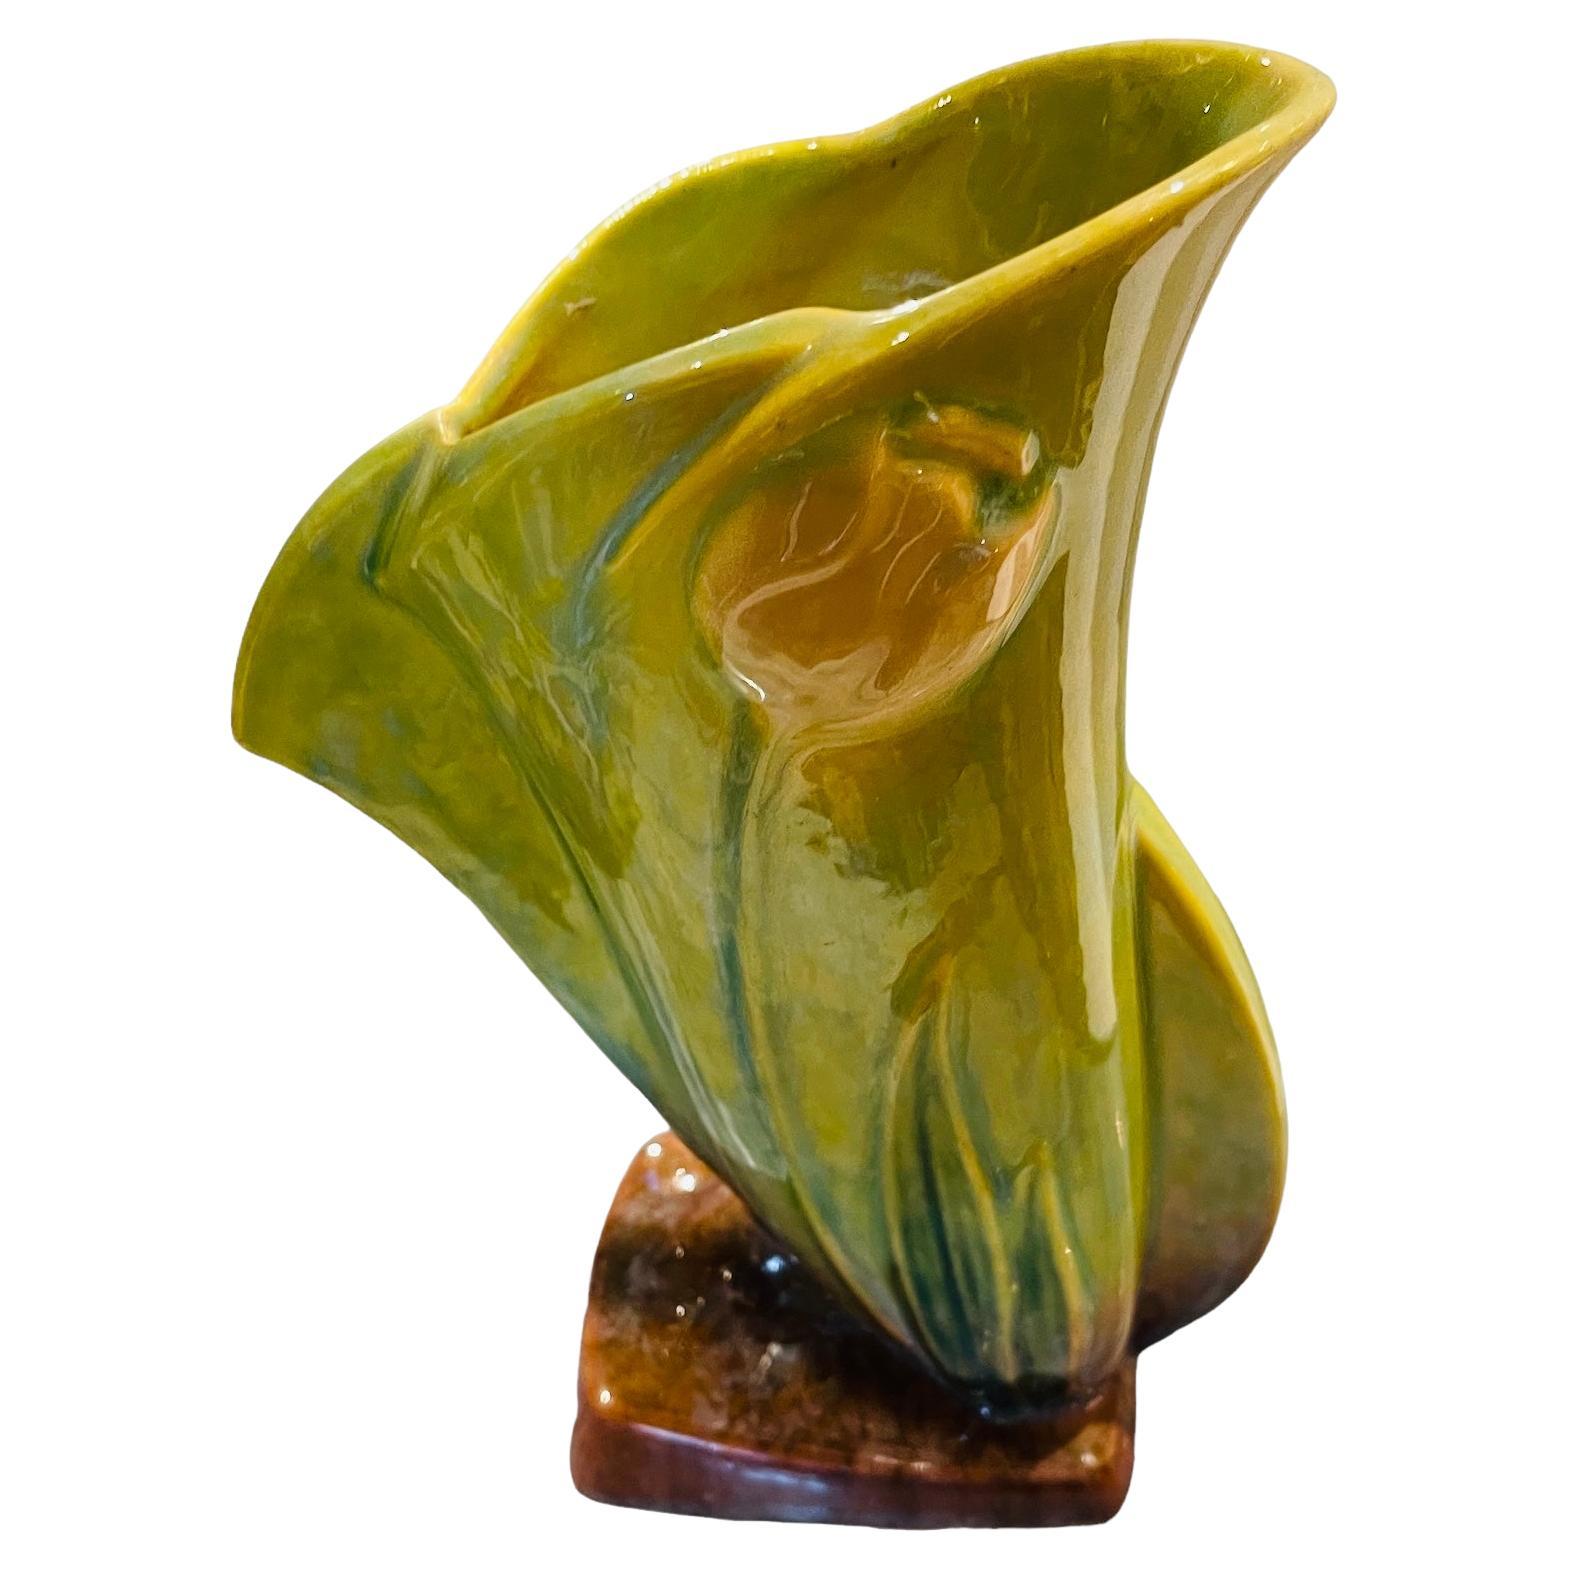 This is a Roseville Art Pottery Wincraft green yellow tulip vase. The vase is shaped like a flower bud that its petals are starting to open. It is decorated with a relief of large green/yellow leaves & light pink tulip flowers. The upper border is